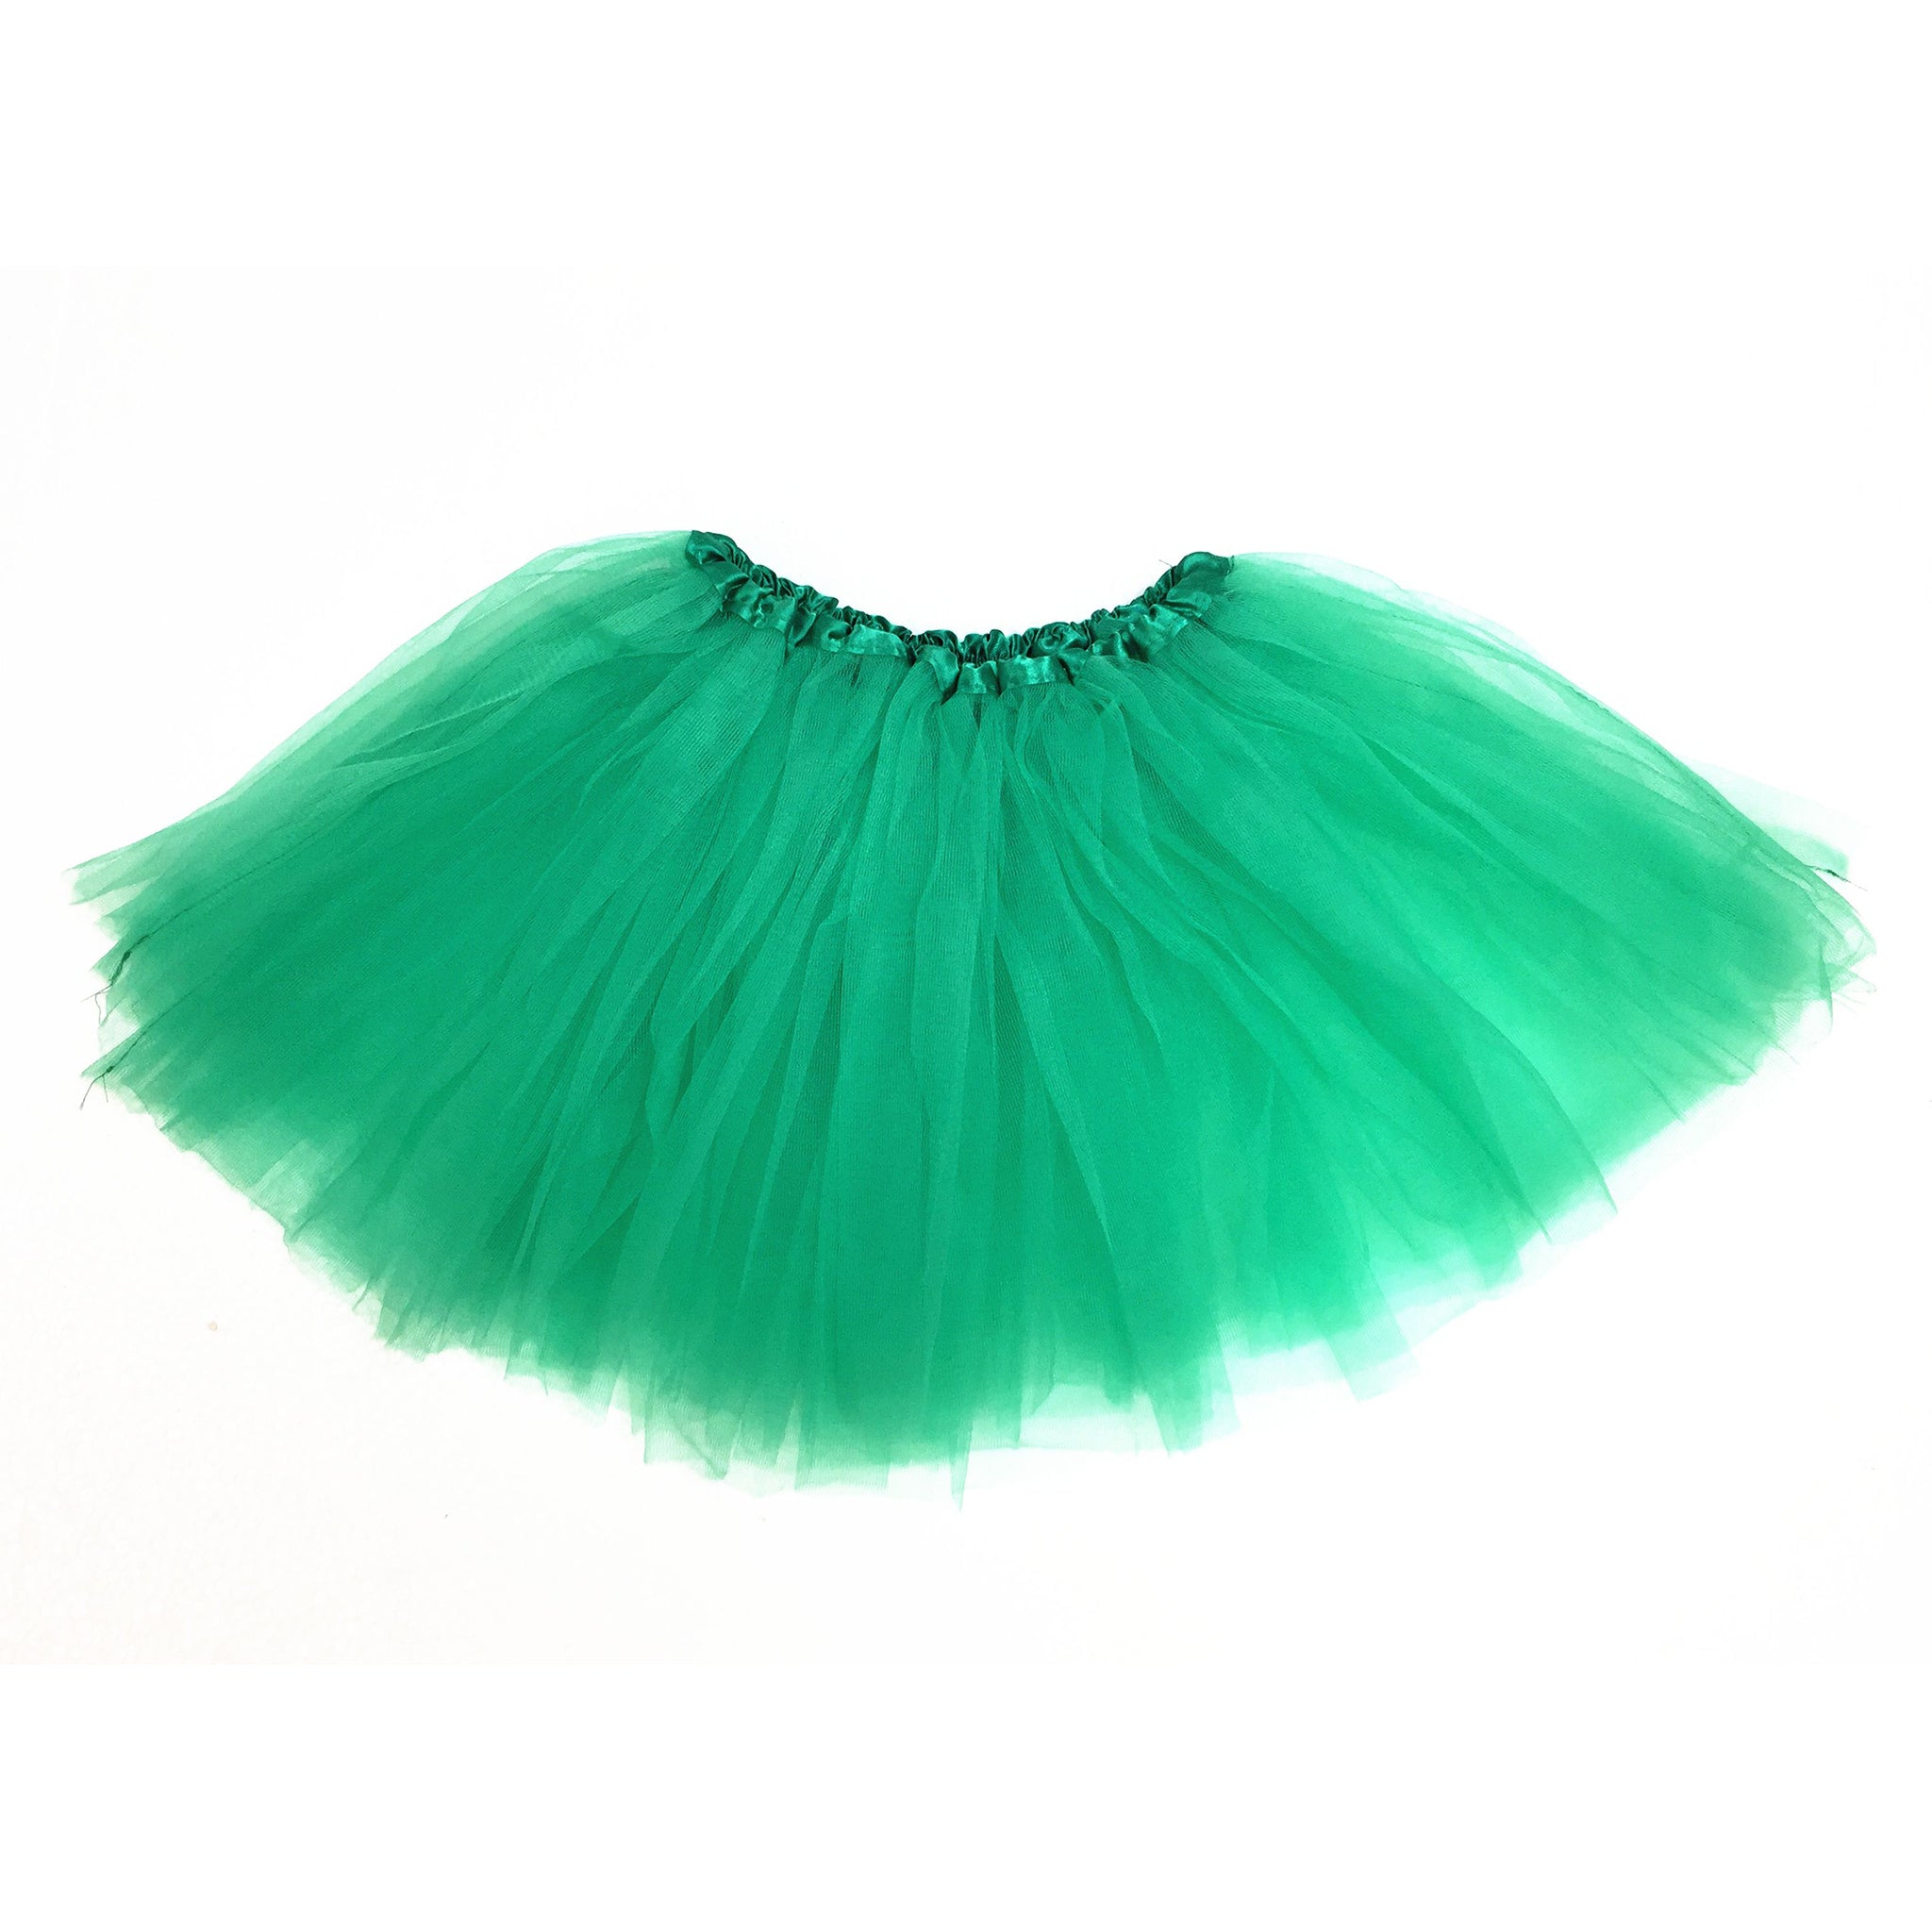 Child's Ballet Tutu - Teal - Getty Museum Store